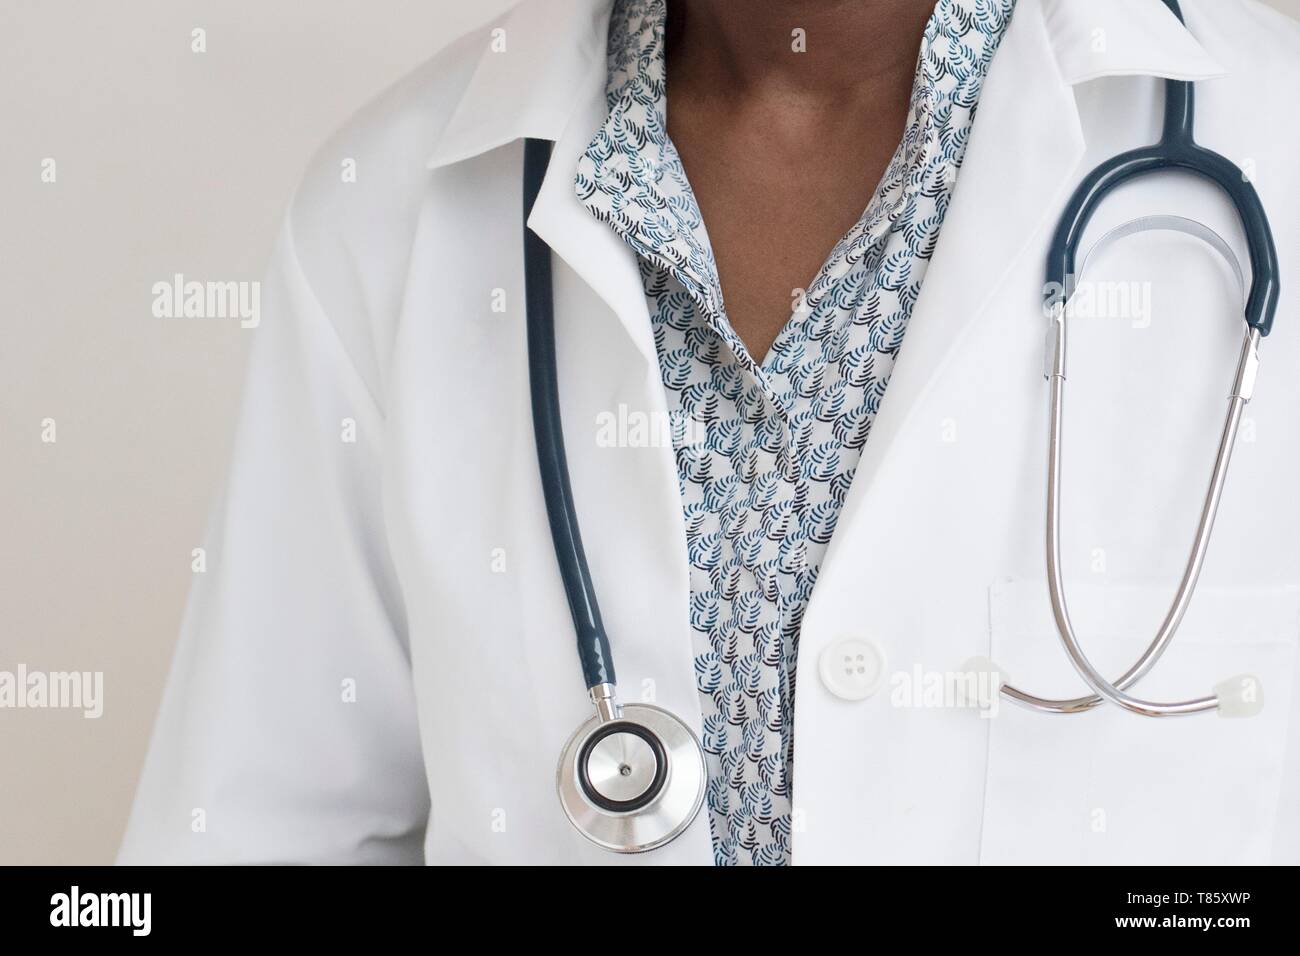 Doctor wearing stethoscope Banque D'Images